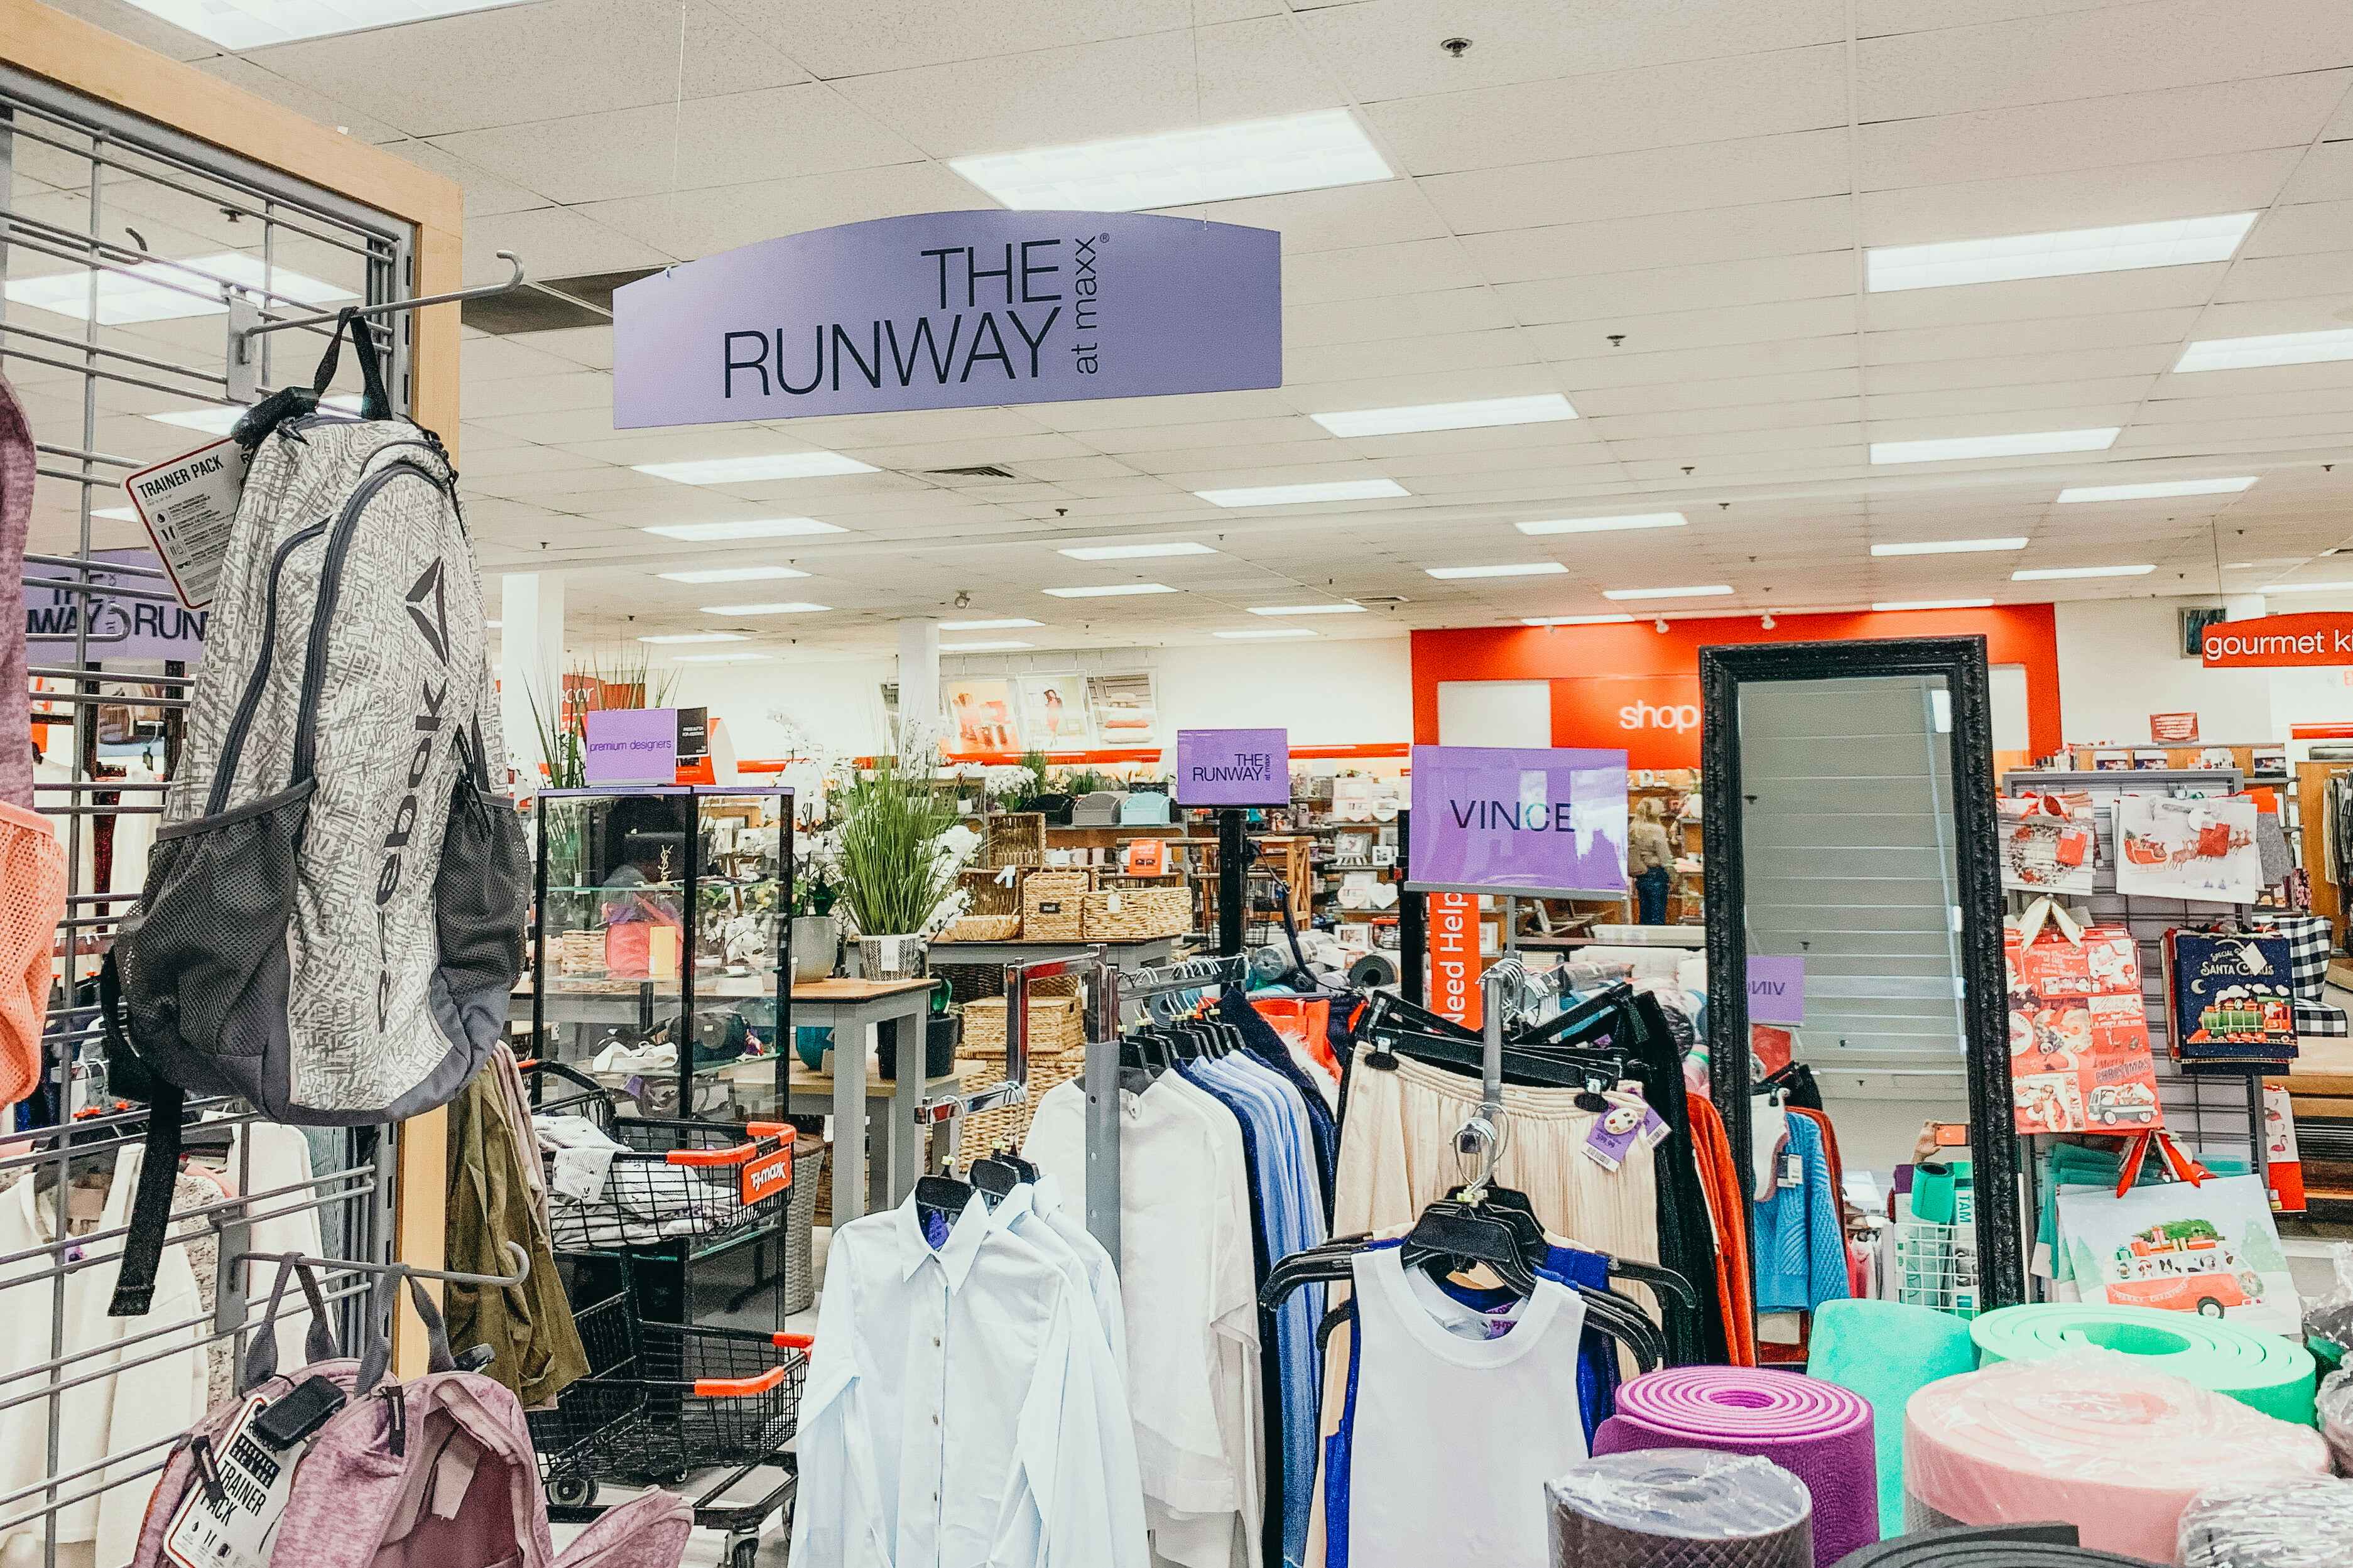 Interior of a TJ Maxx store Runway section showing signs for brands like Vince